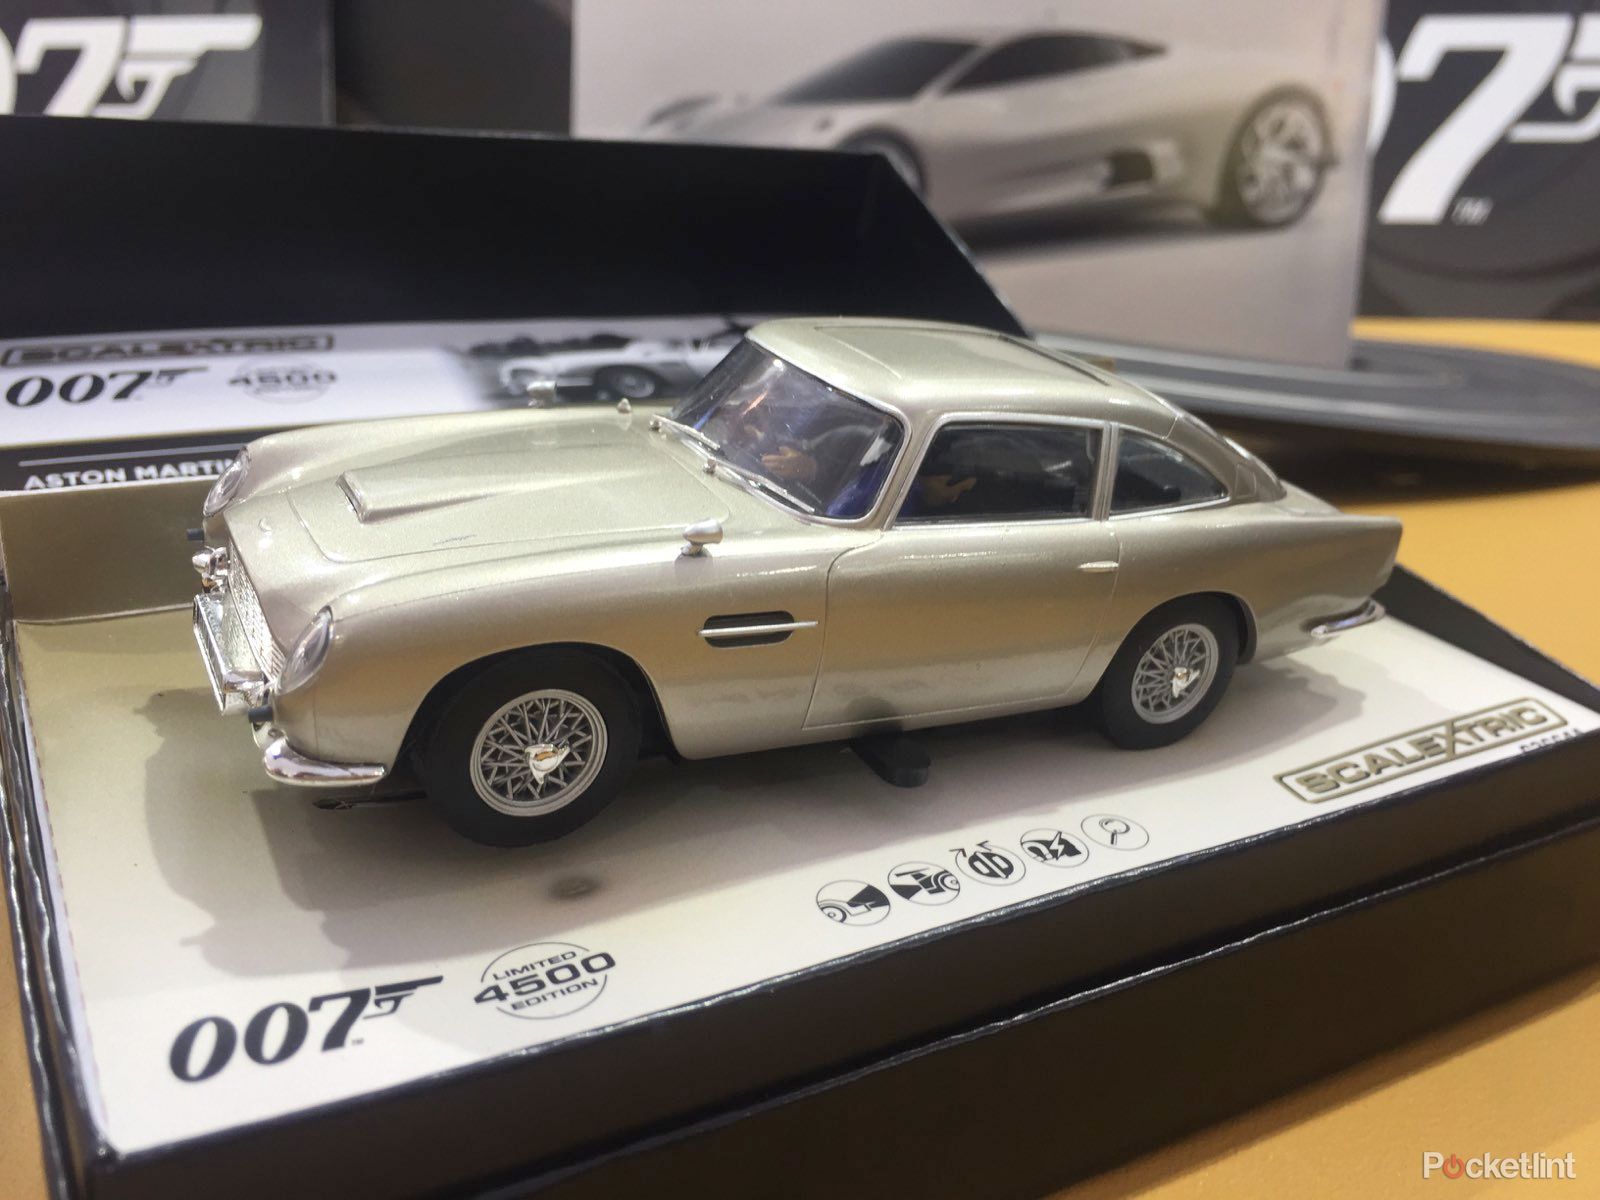 james bond spectre scalextric set confirmed aston martin db10 to be included image 5